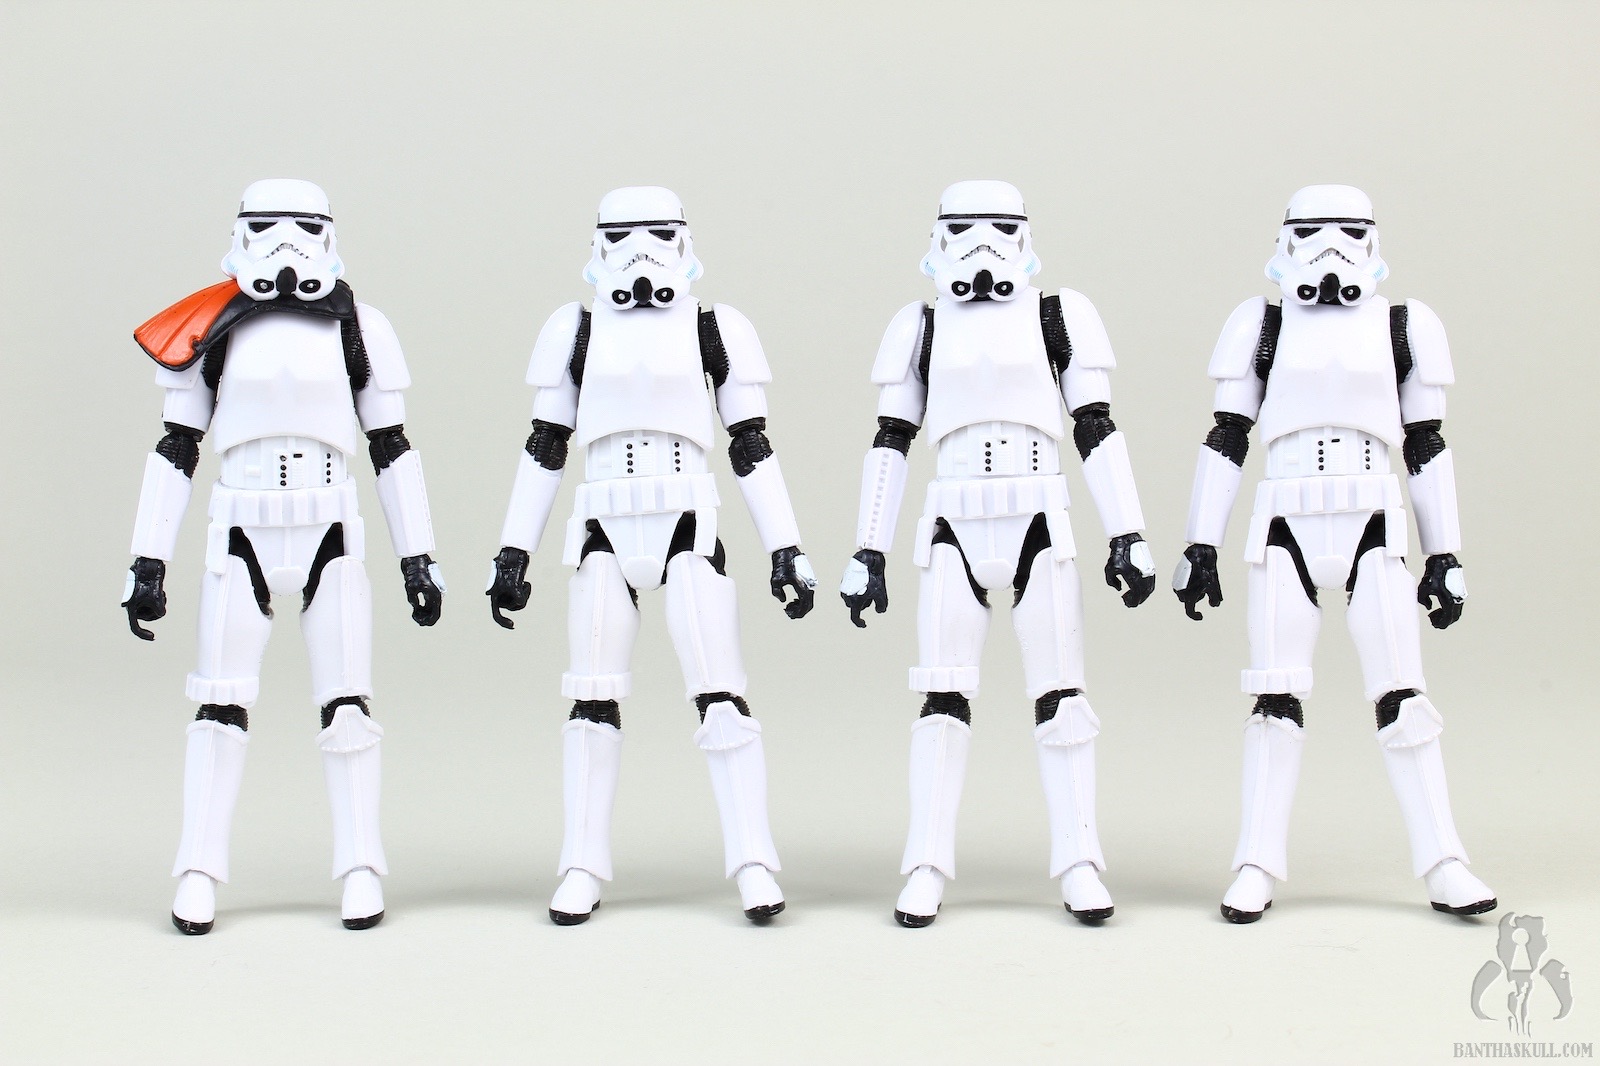 cindy macpherson recommends Images Of Stormtroopers